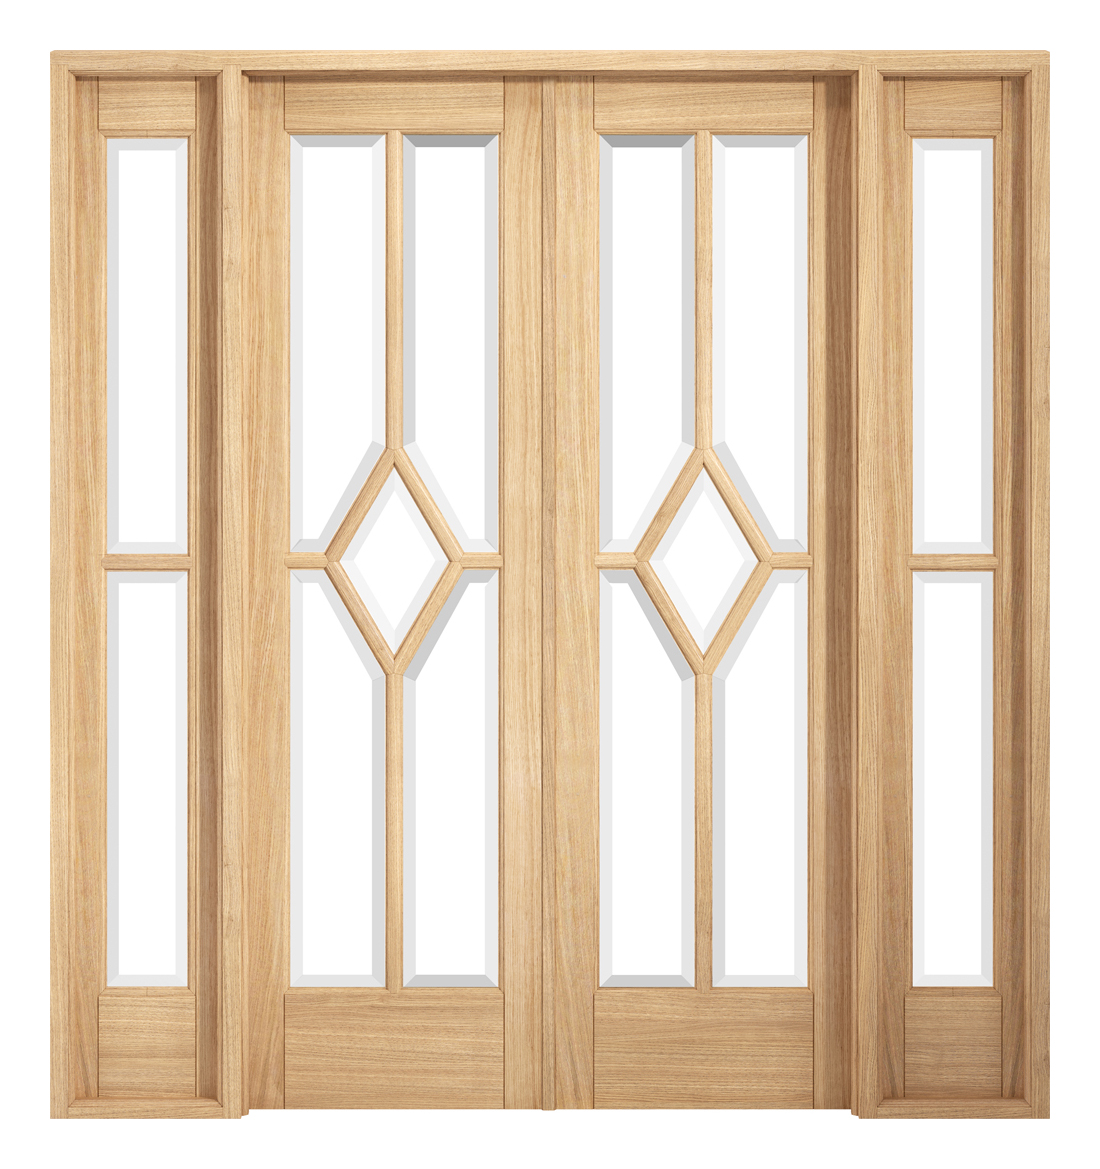 Image of LPD Internal Reims Room Divider W6 Pre-Finished Oak Solid Core Door - 1904 x 2031mm